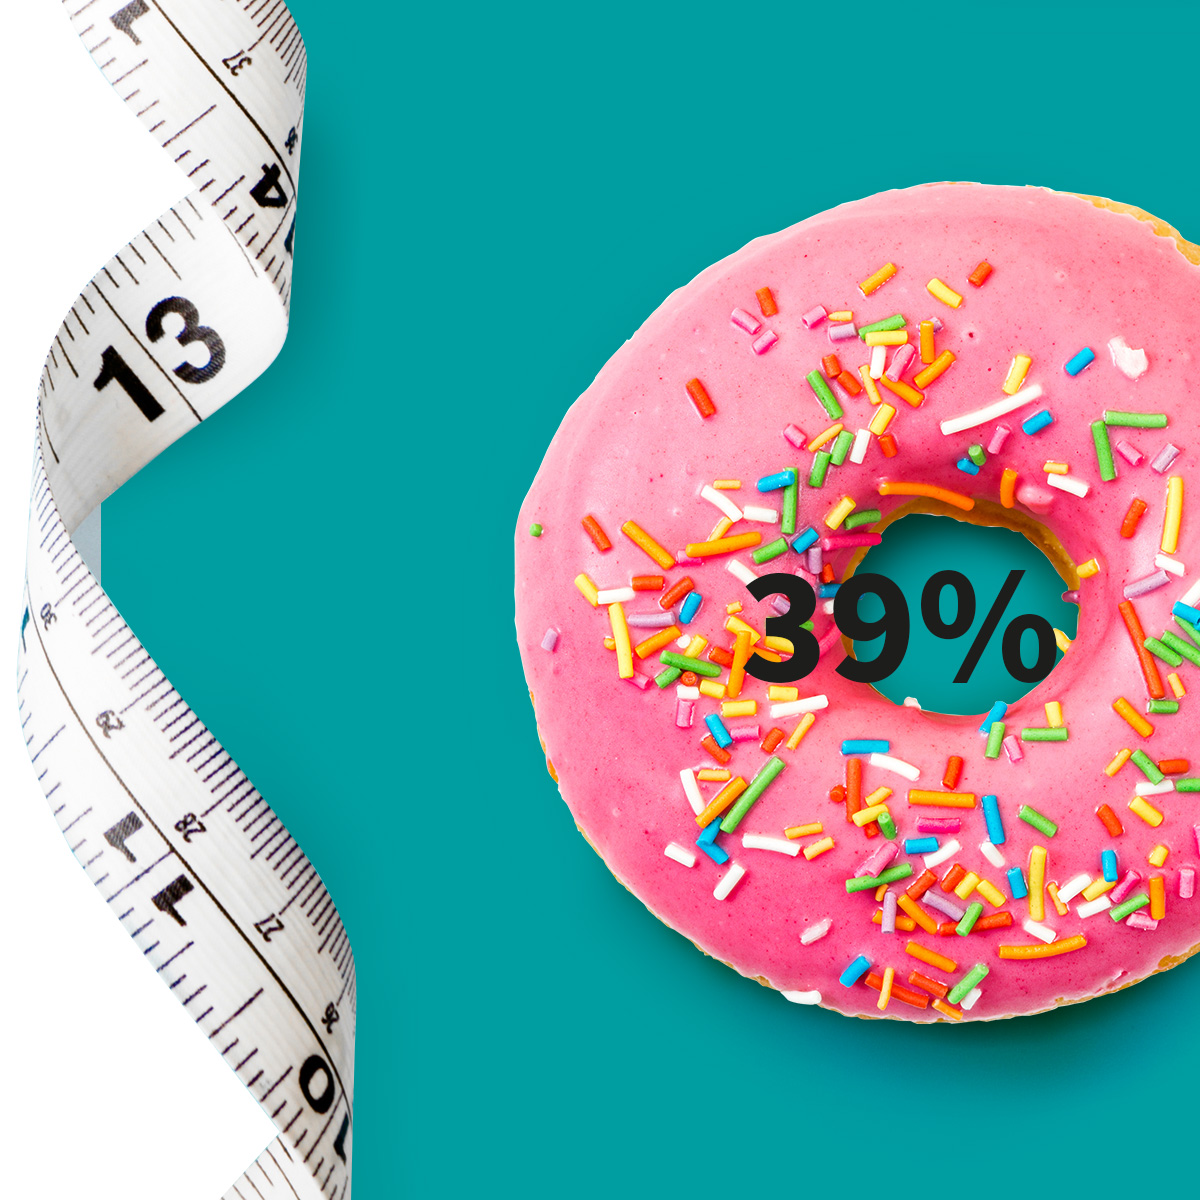 [.SE-se Sweden (swedish)] •	A measuring tape and a doughnut with pink icing and colourful sugar sprinkle as a metaphor for obesity